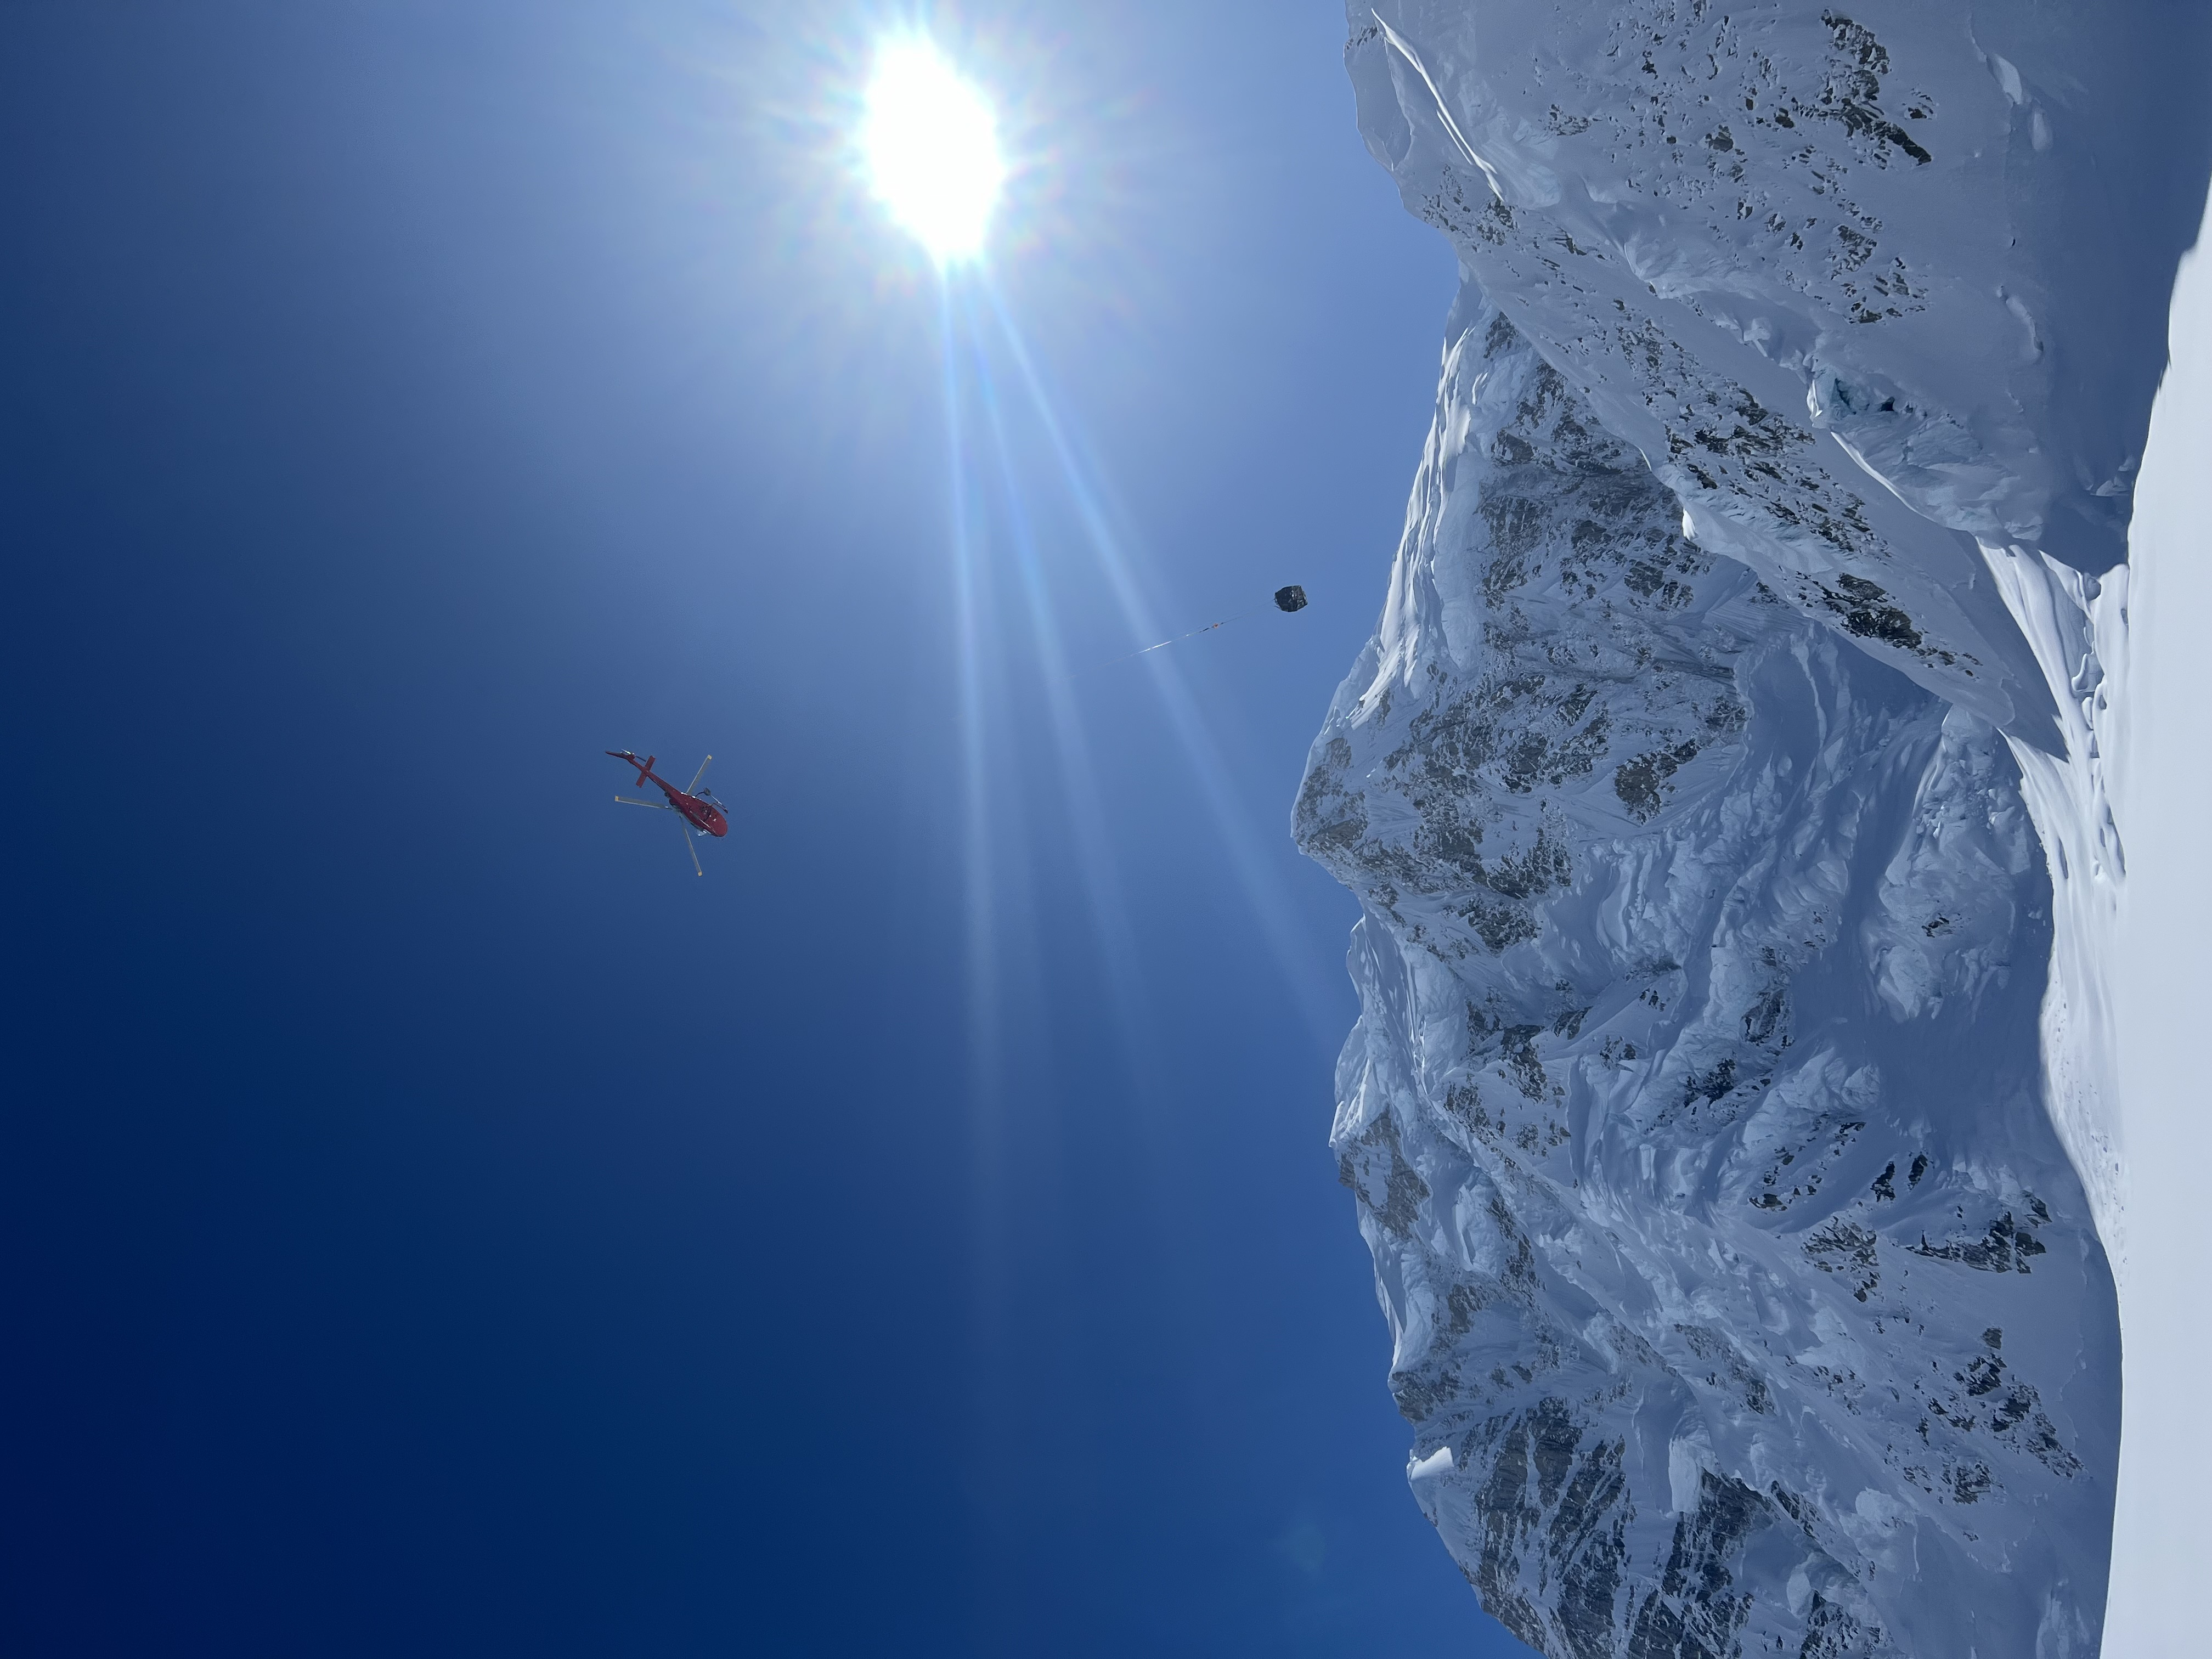 A helicopter flies past a snow-covered mountain hauling a cargo netload at the end of long rope line